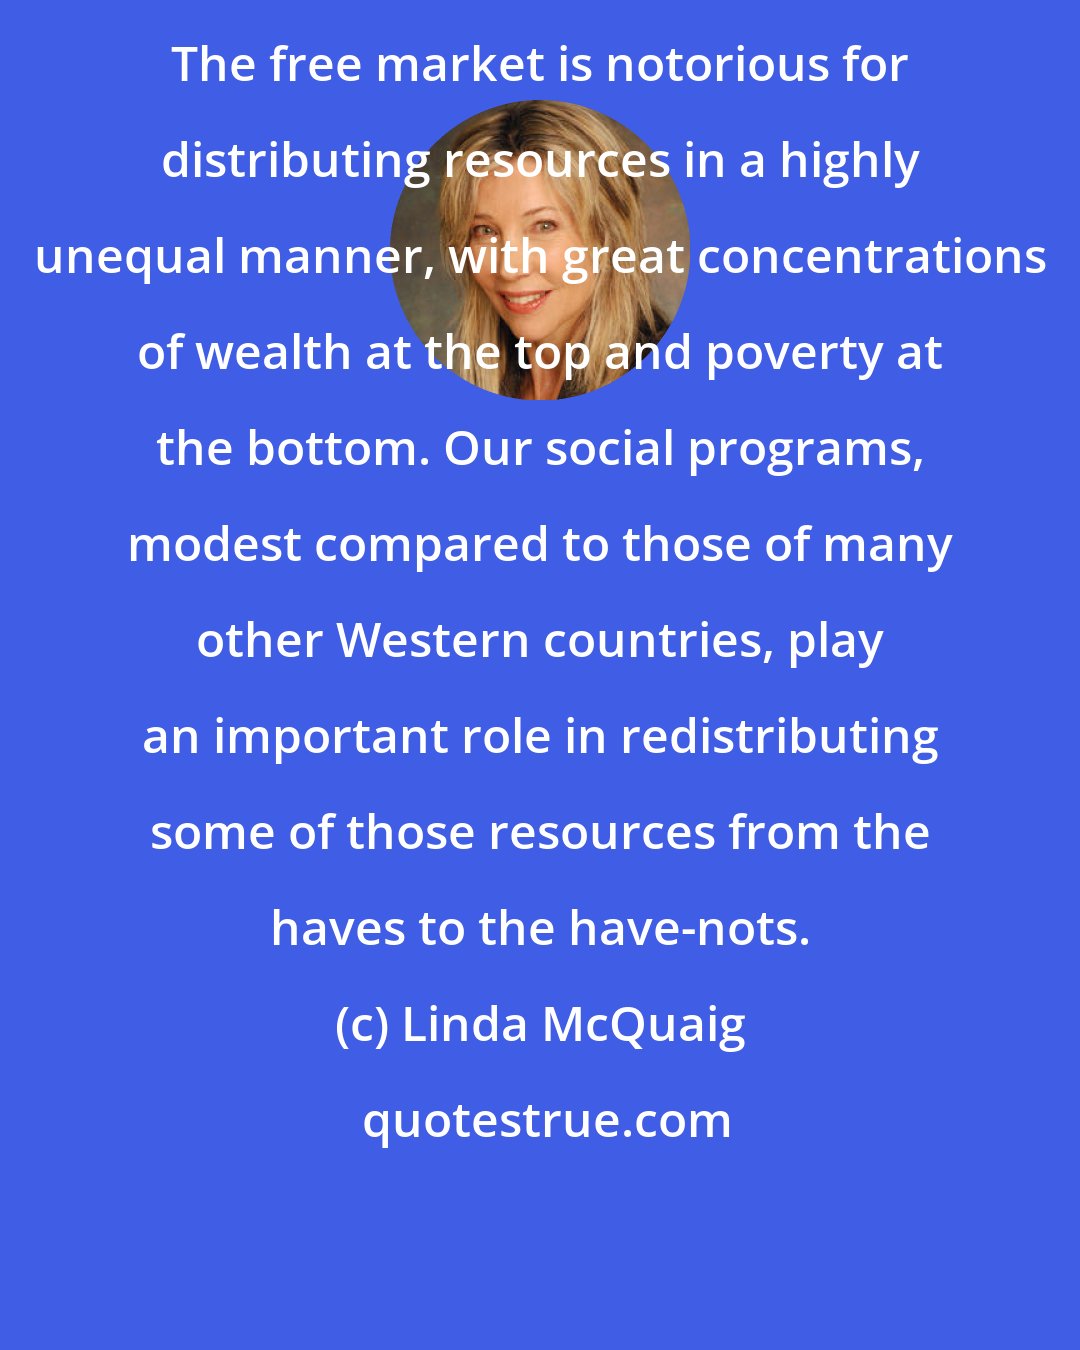 Linda McQuaig: The free market is notorious for distributing resources in a highly unequal manner, with great concentrations of wealth at the top and poverty at the bottom. Our social programs, modest compared to those of many other Western countries, play an important role in redistributing some of those resources from the haves to the have-nots.